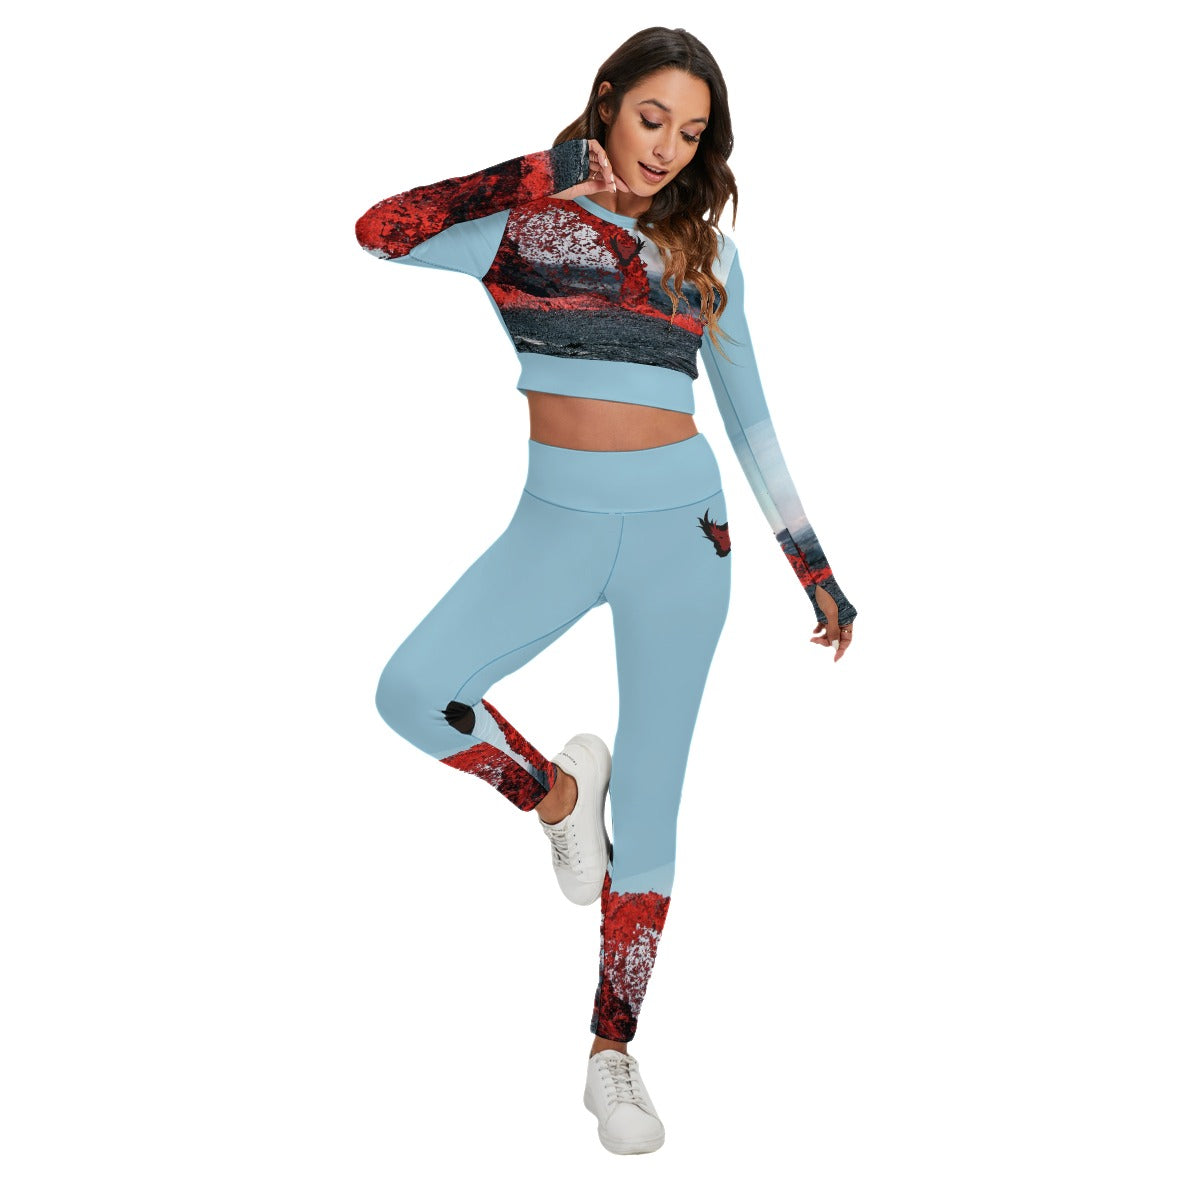 Under Pressure double dragon Women's Sport Set With Backless Top And Leggings